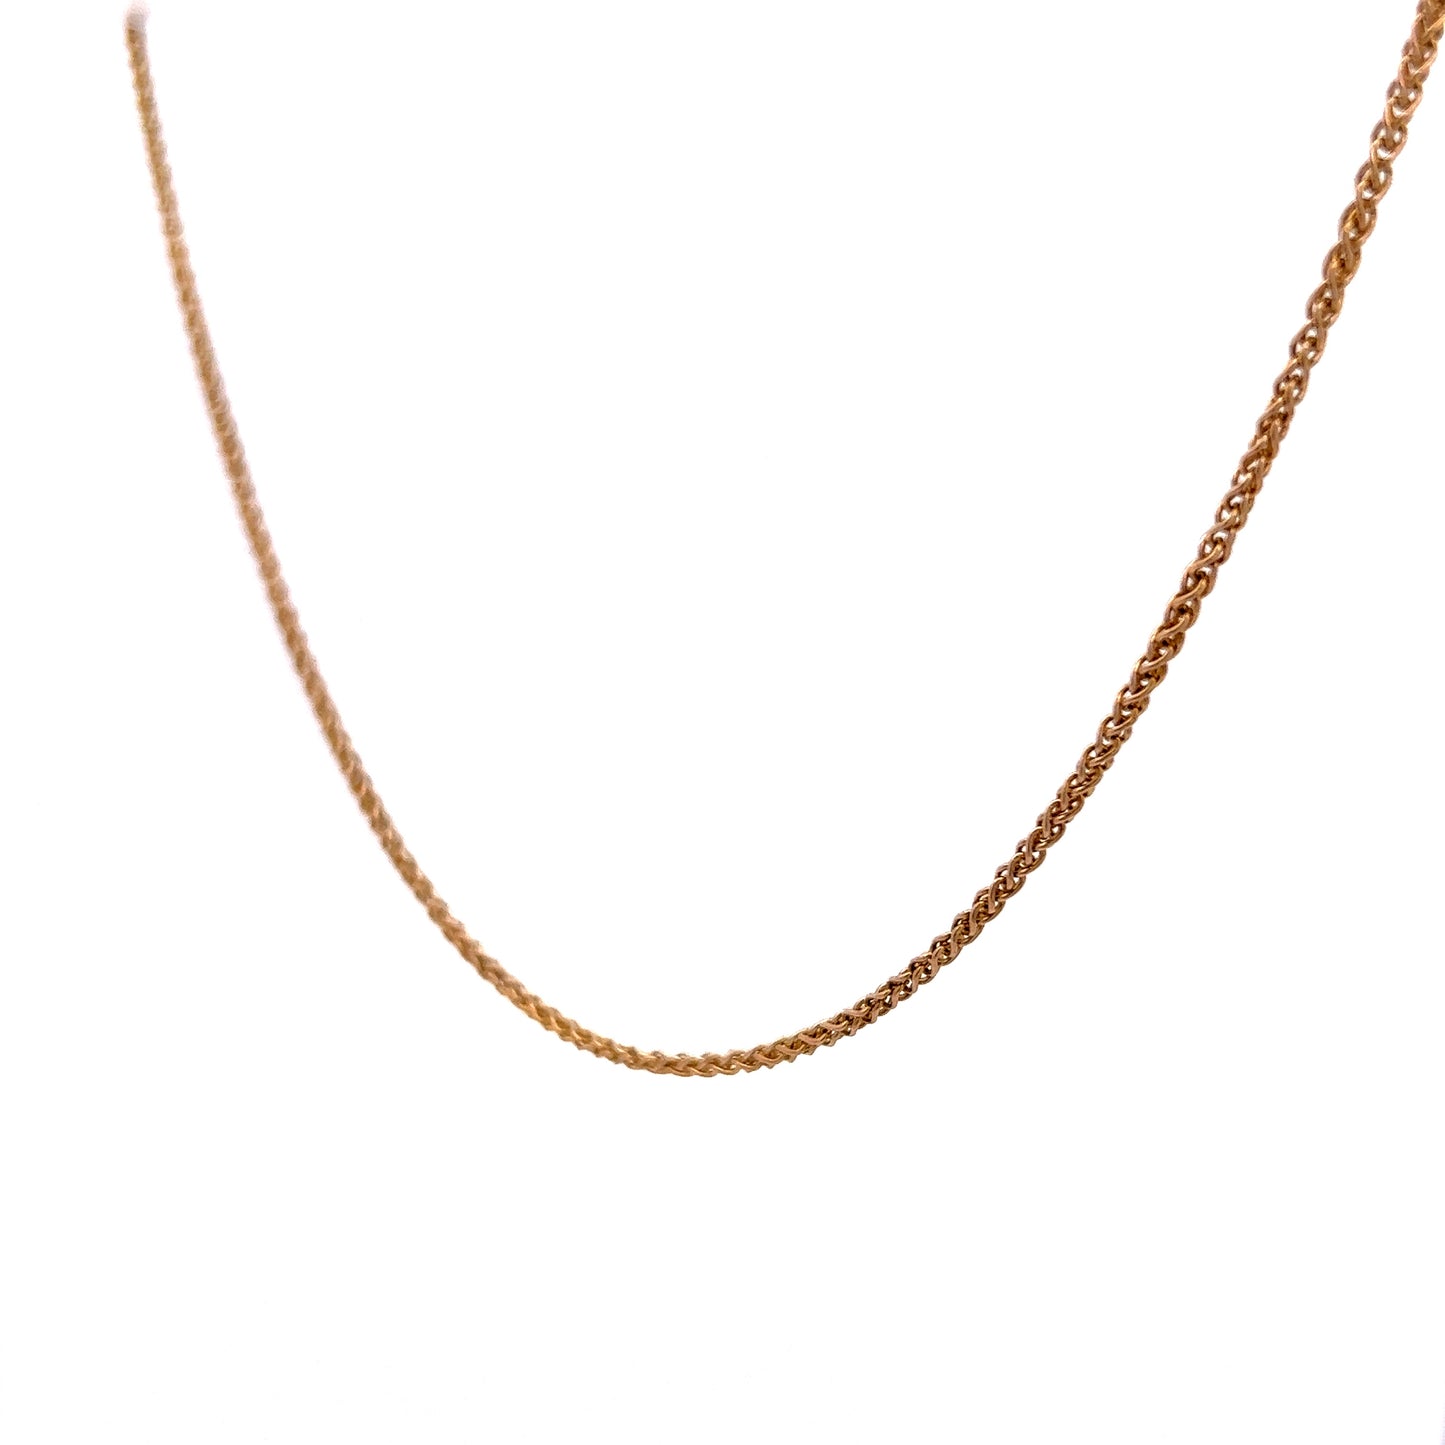 20" Wheat Chain Necklace in 14k Yellow Gold